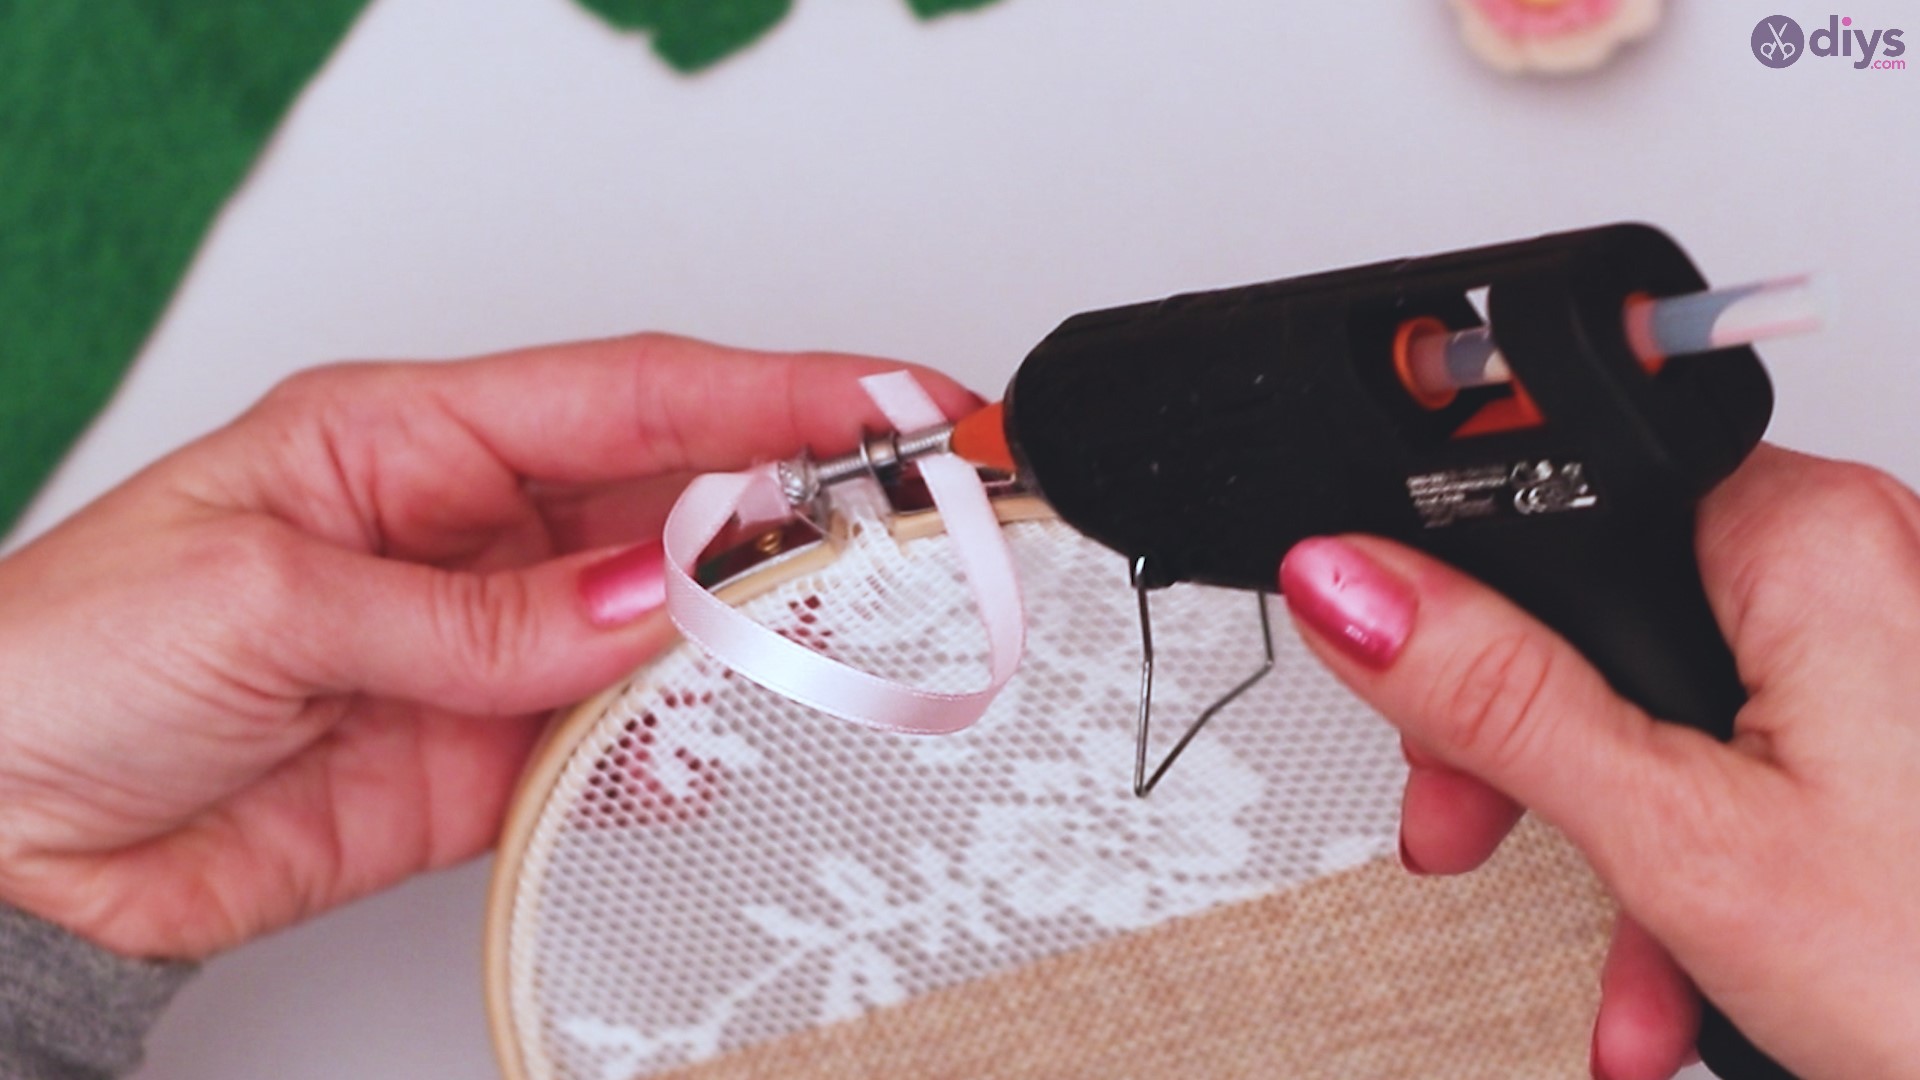 Diy embroidery hoop wall decor tutorial step by step (56)